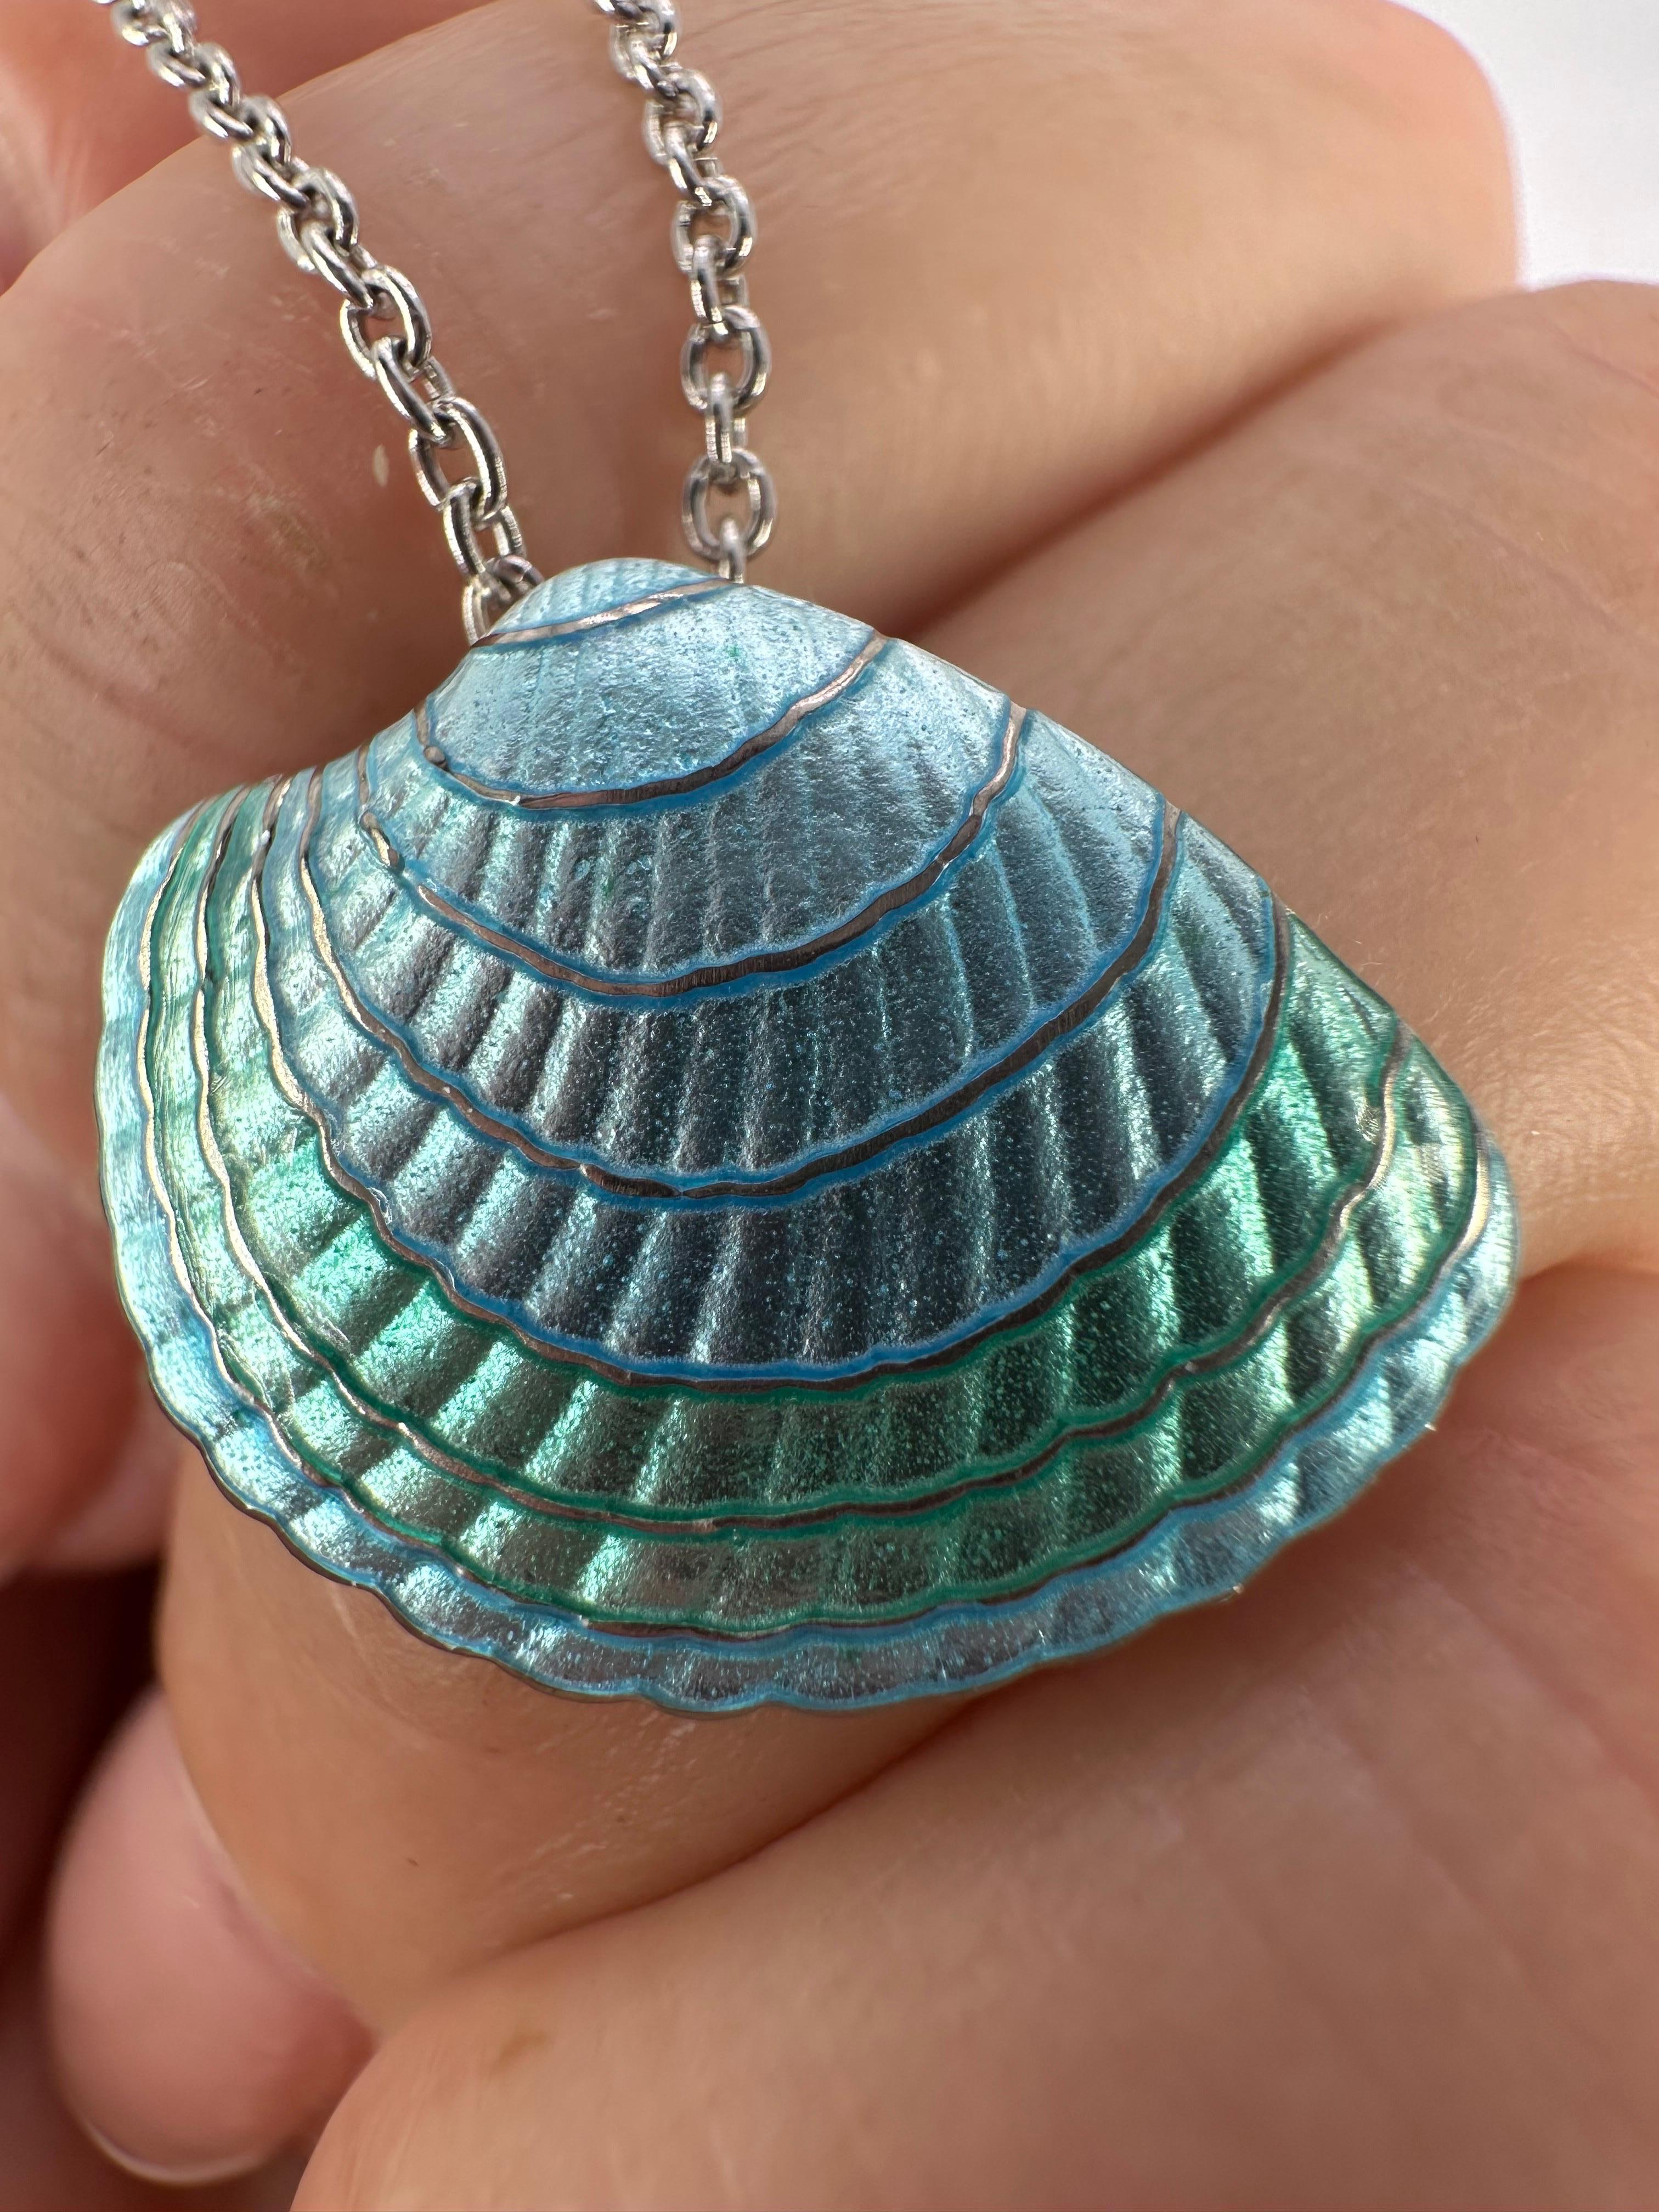 Shell pendant necklace 925 ss silver pendant necklace sea For Sale 2